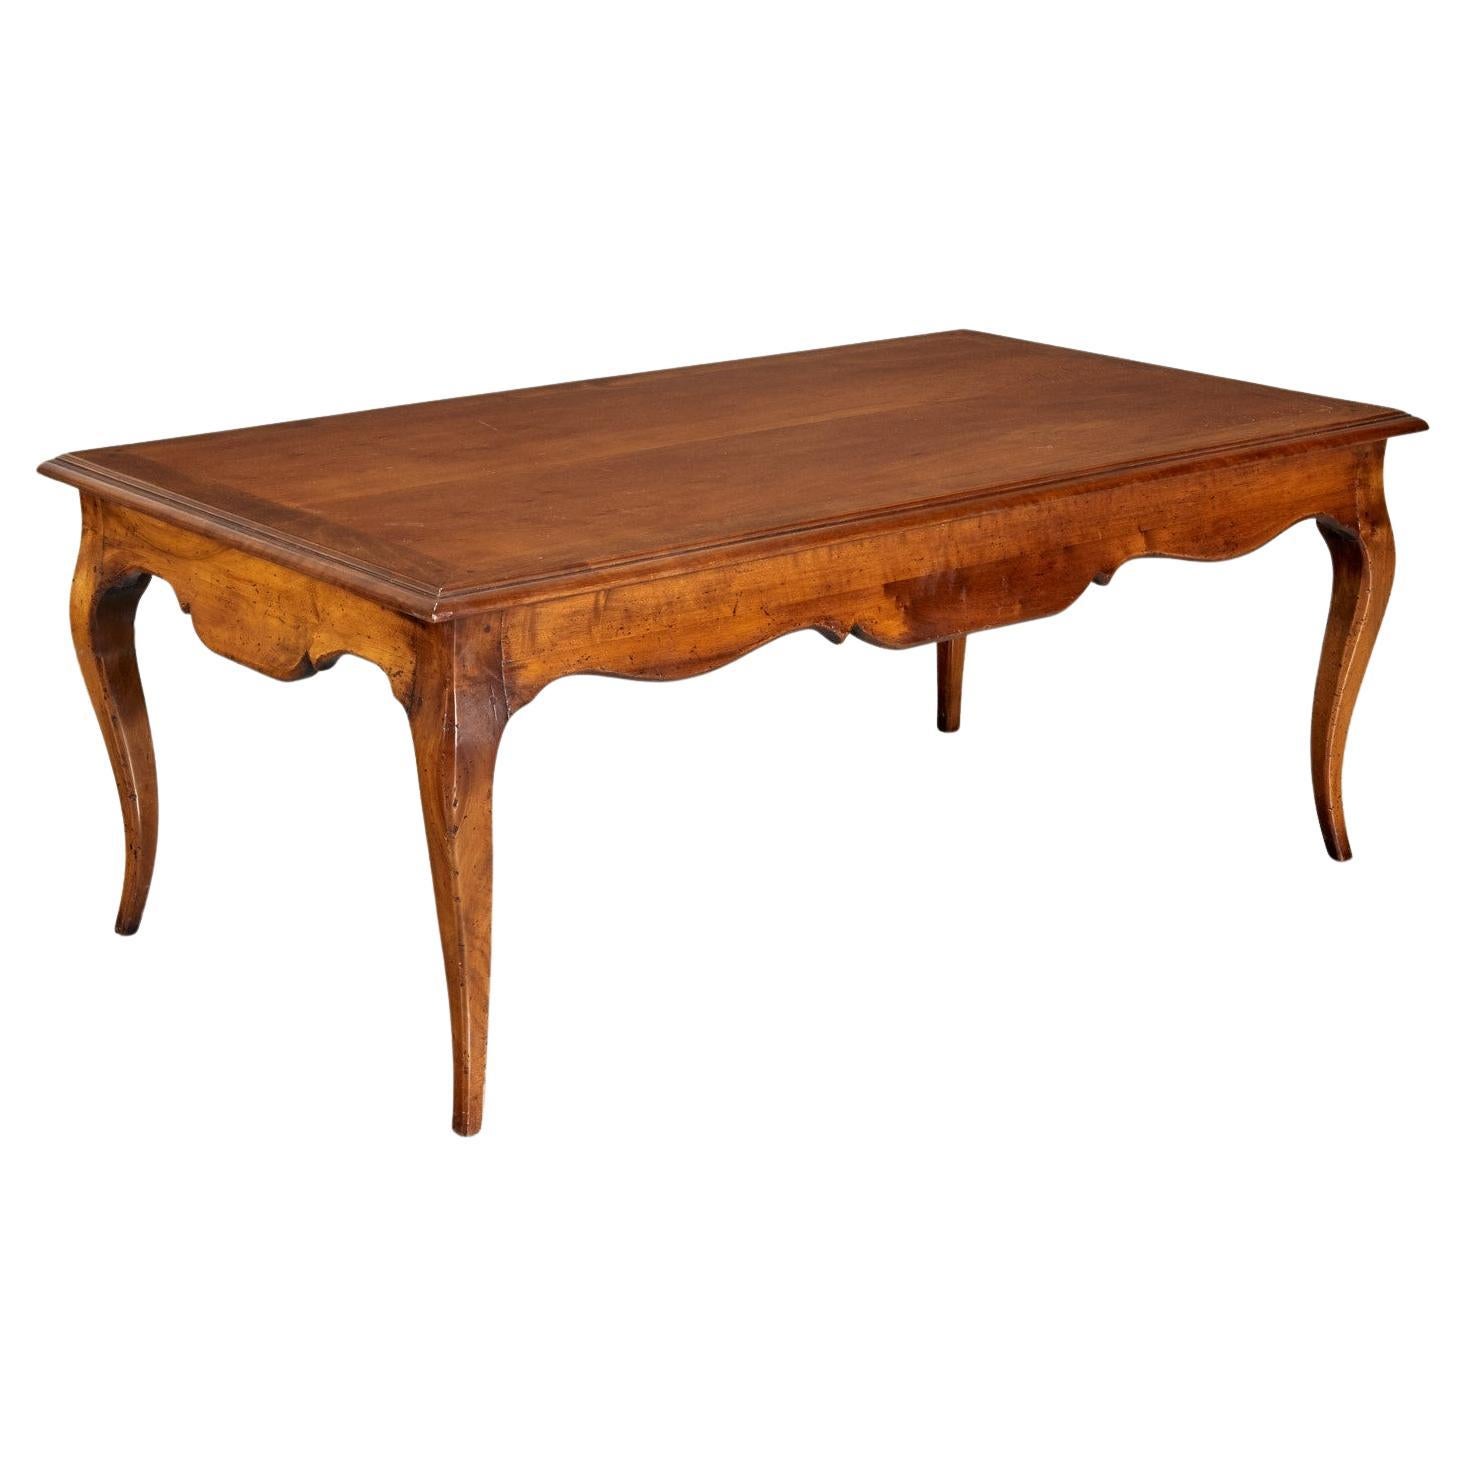 Mid 20th c., French Provincial Cherry Coffee Table, Mailfert Amos Collection